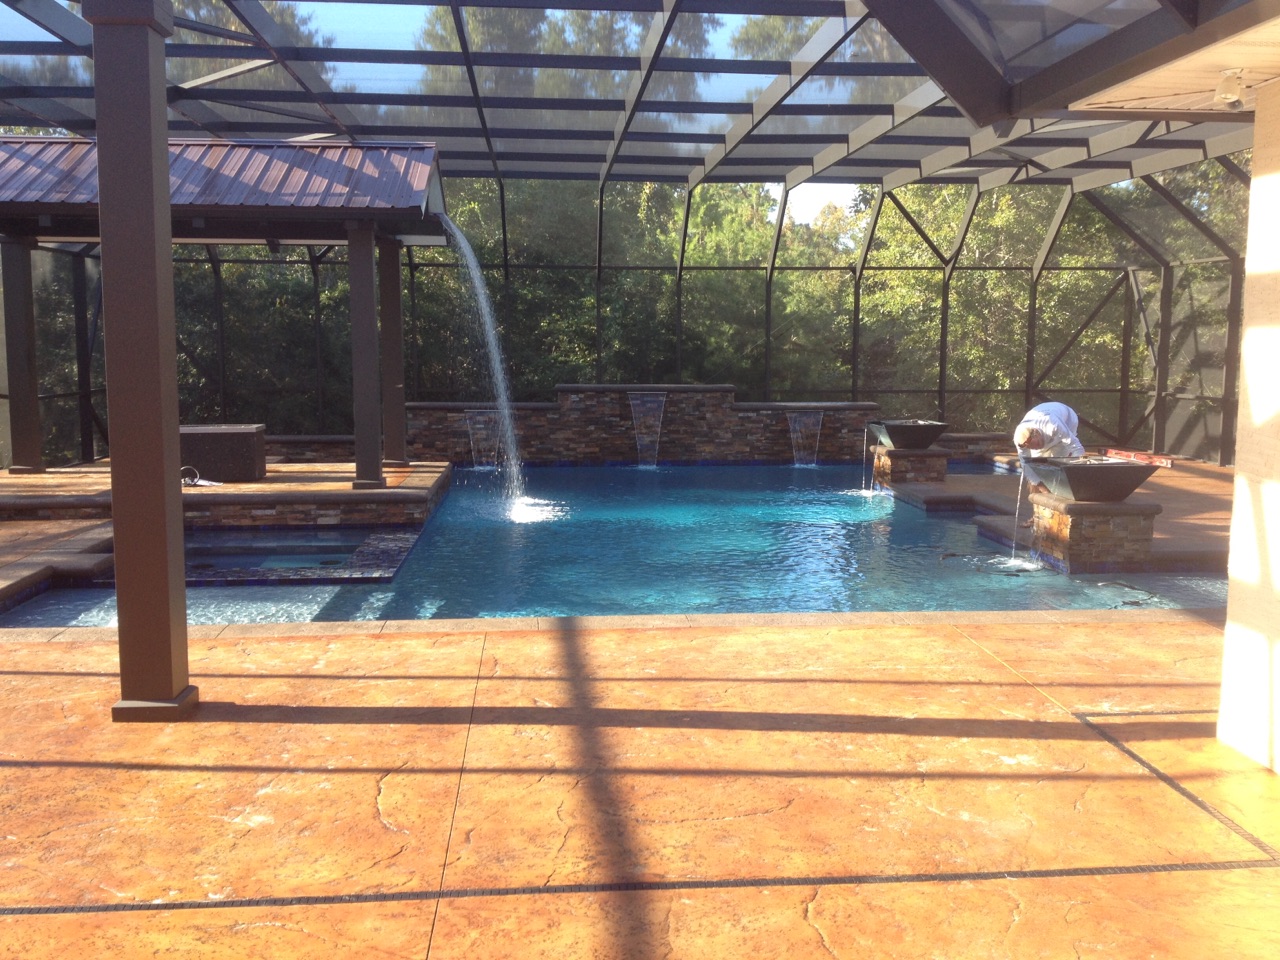 Gunite pool with fire and waterfall